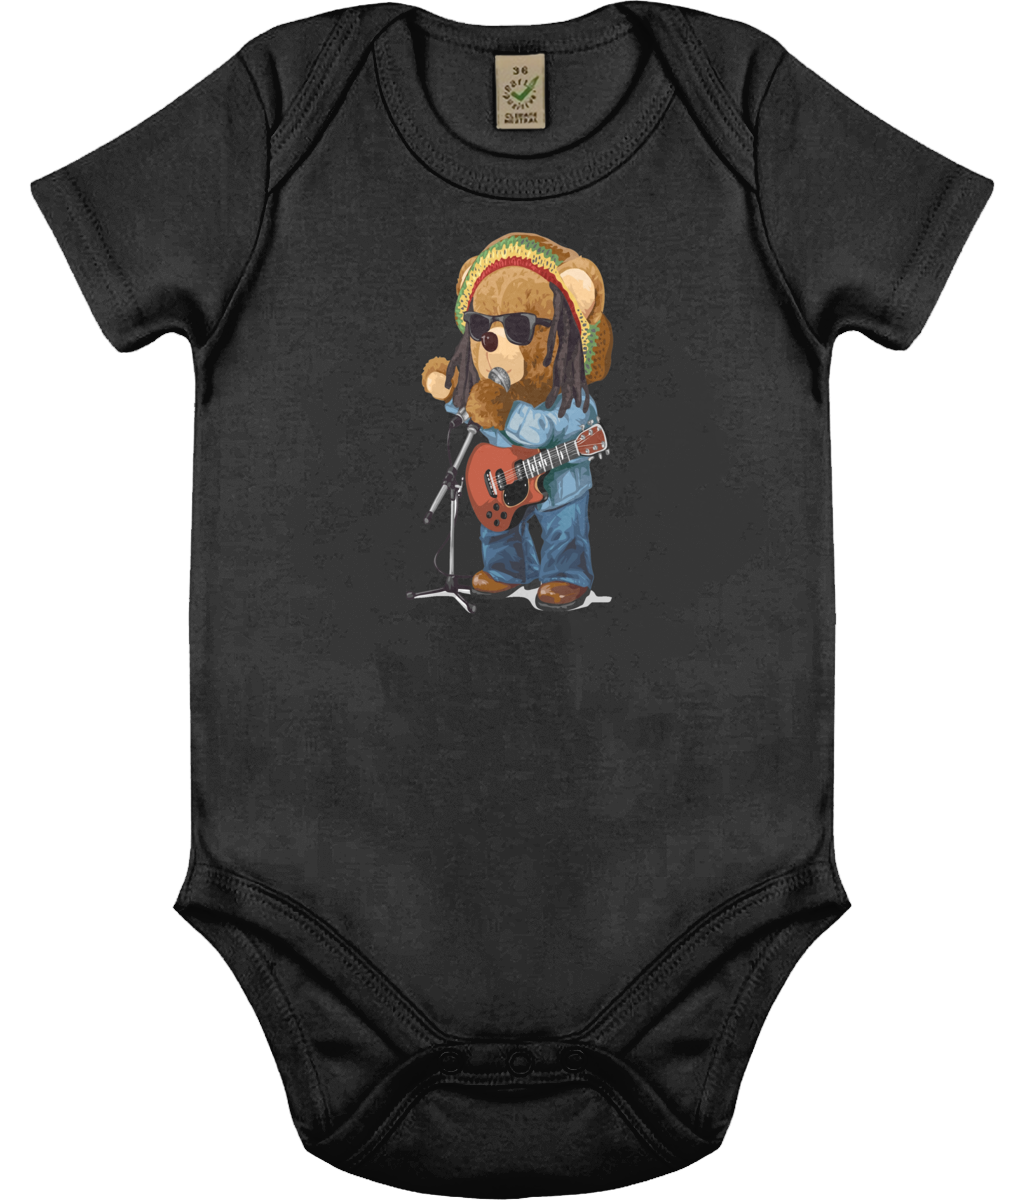 Rasta Bear - Cotton Baby Bodysuit - Various Colours Available - FAST UK DELIVERY